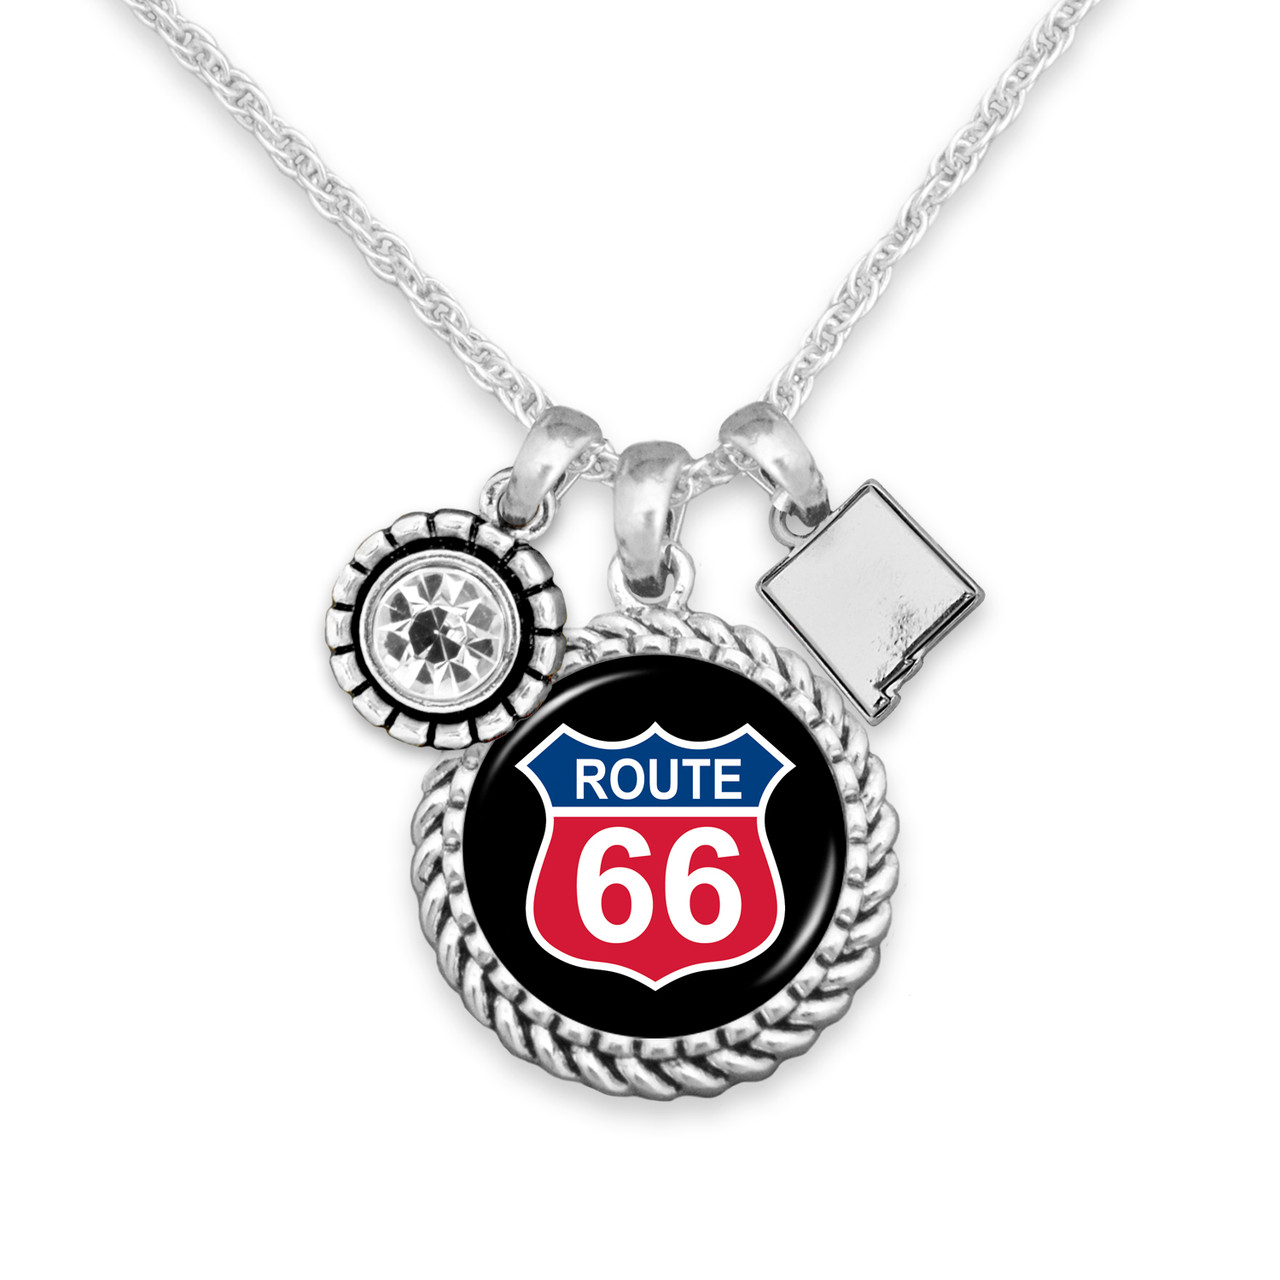 Route 66 Olivia Necklace - New Mexico